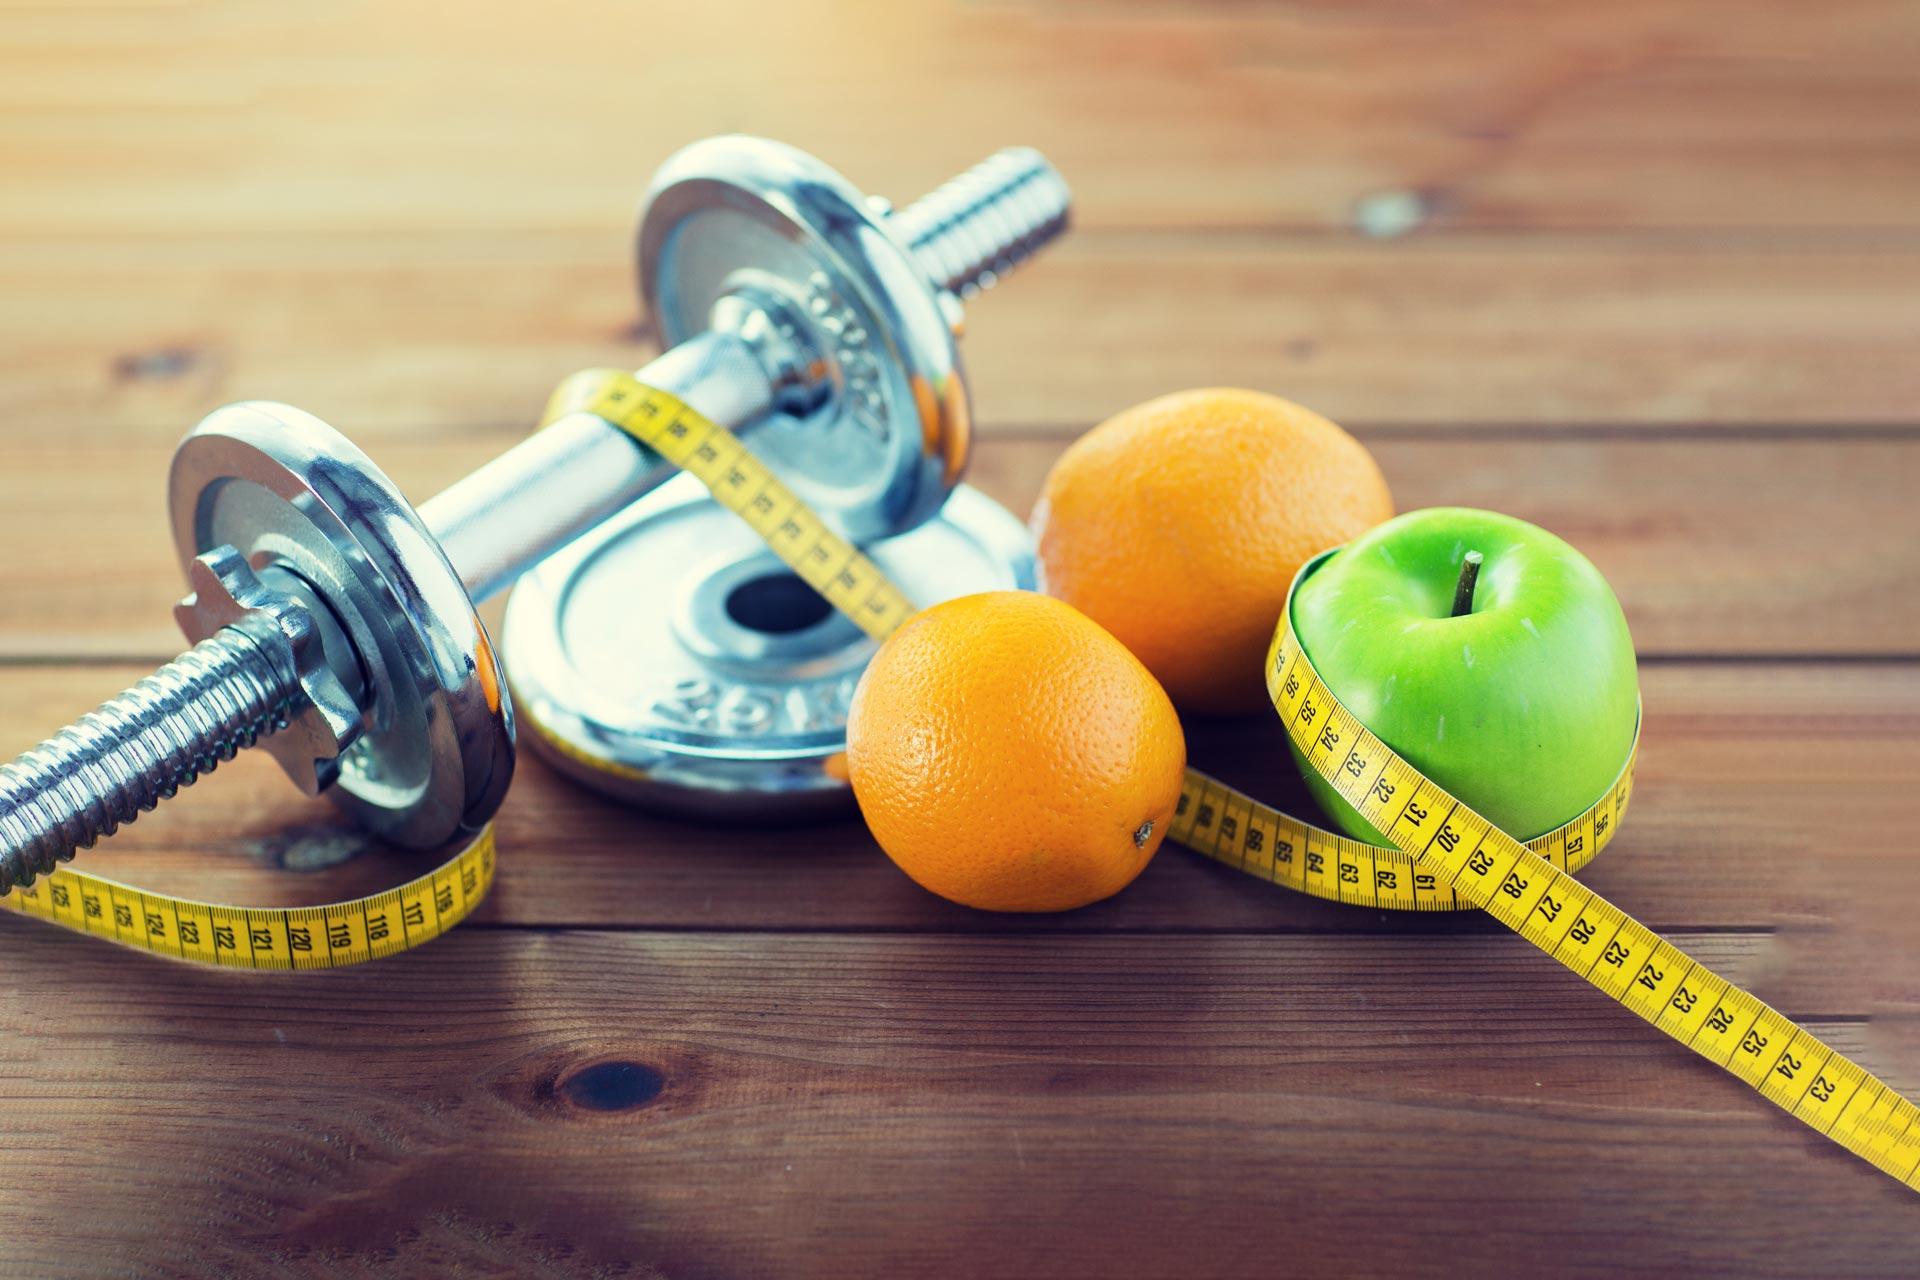 7 Easy Fall Weight Loss Tips that Can Help You Lose Weight